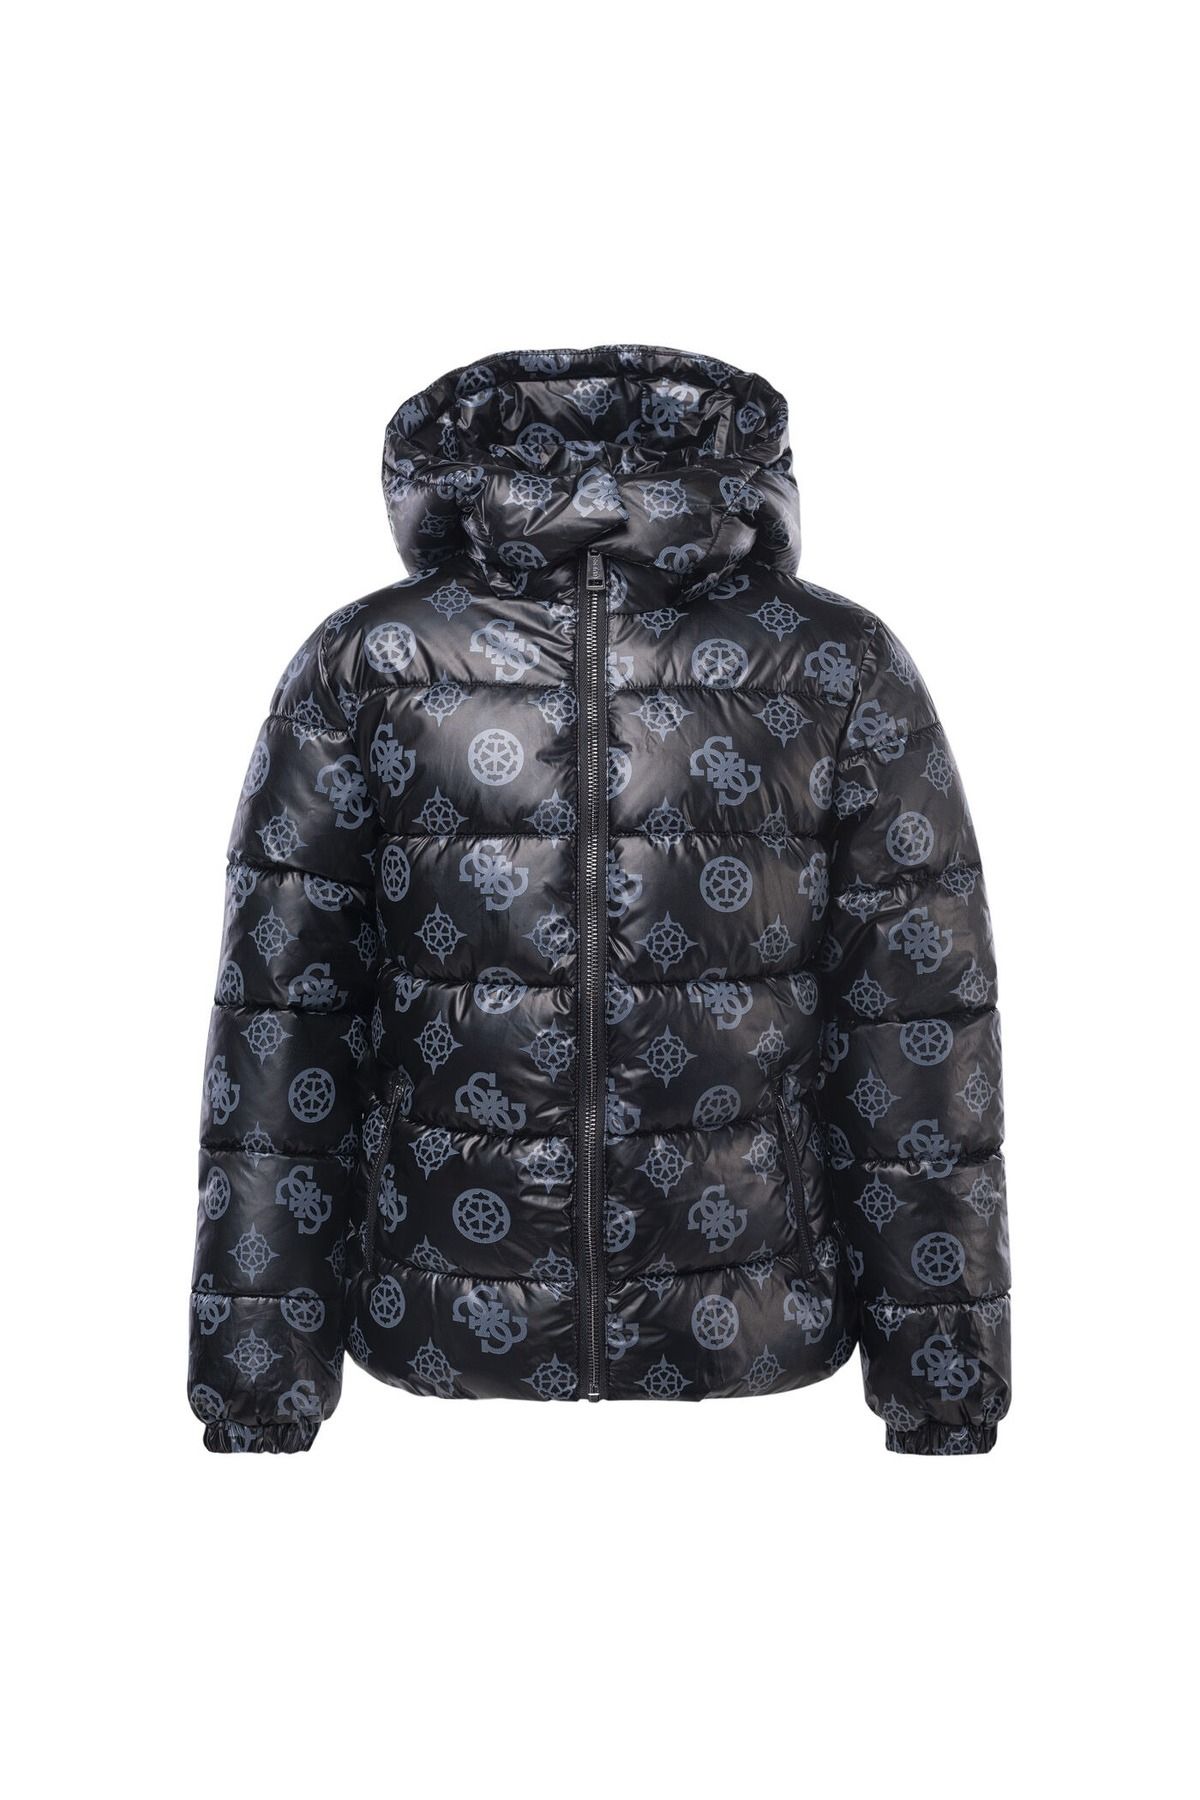 Guess HOODED PADDED JACKET